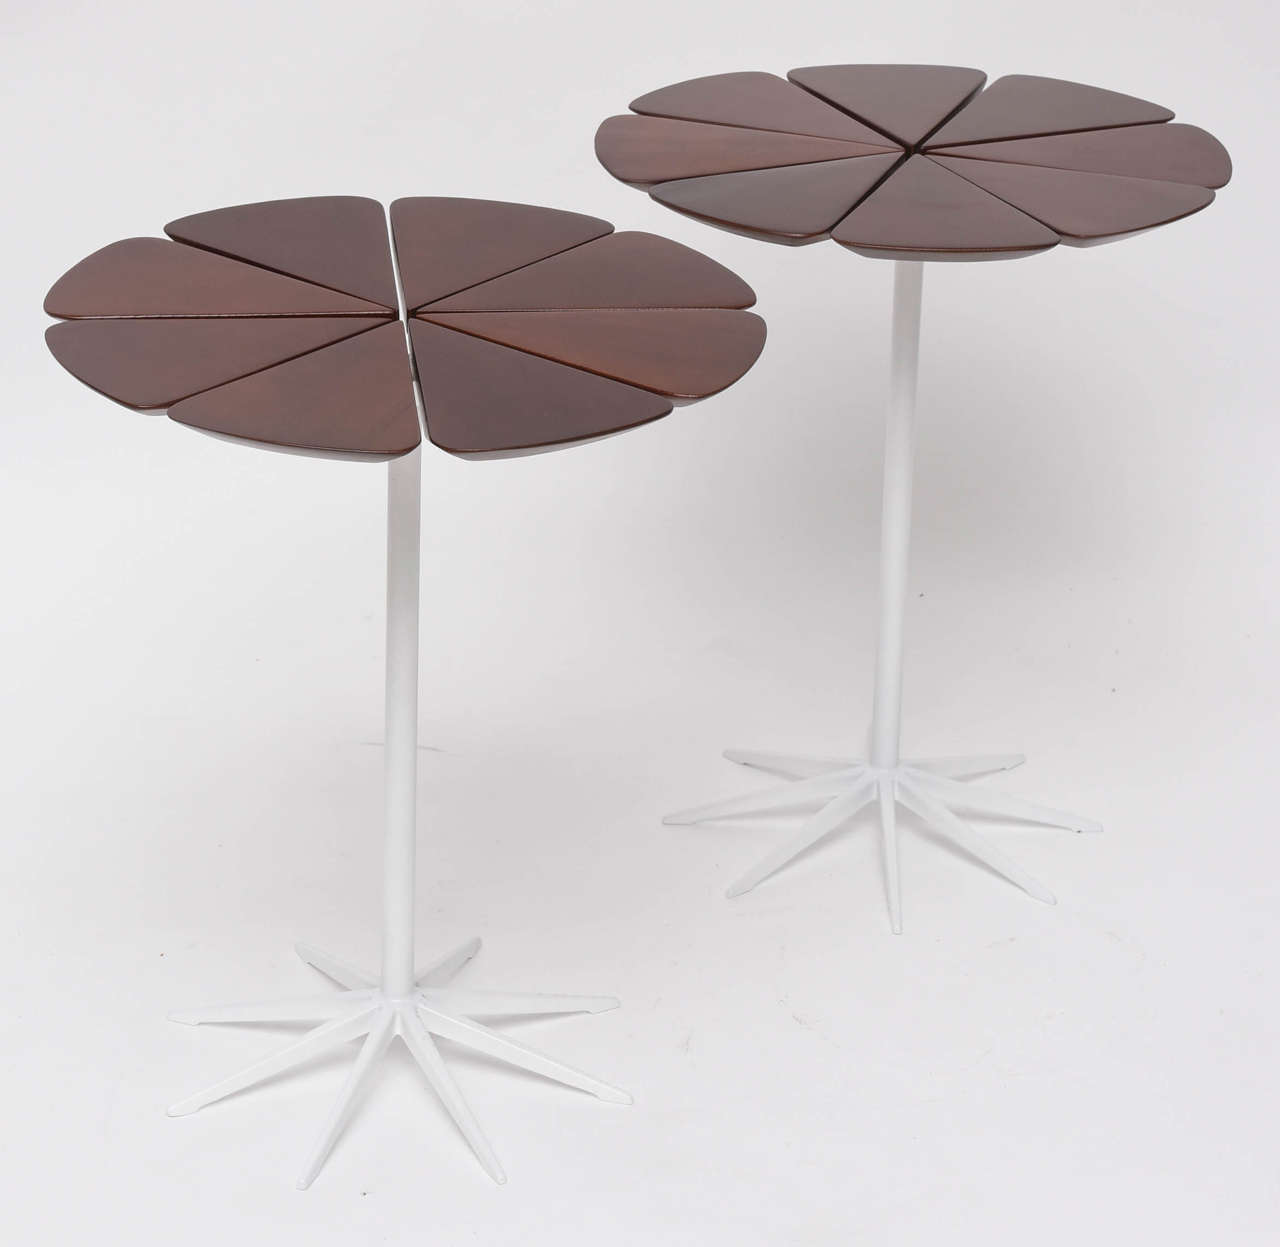 Always fresh and charming! Early pair of Knoll petal tables by Richard Schultz with white enameled bases and redwood tops. Over-sprayed remains of original label on one table. Restored.